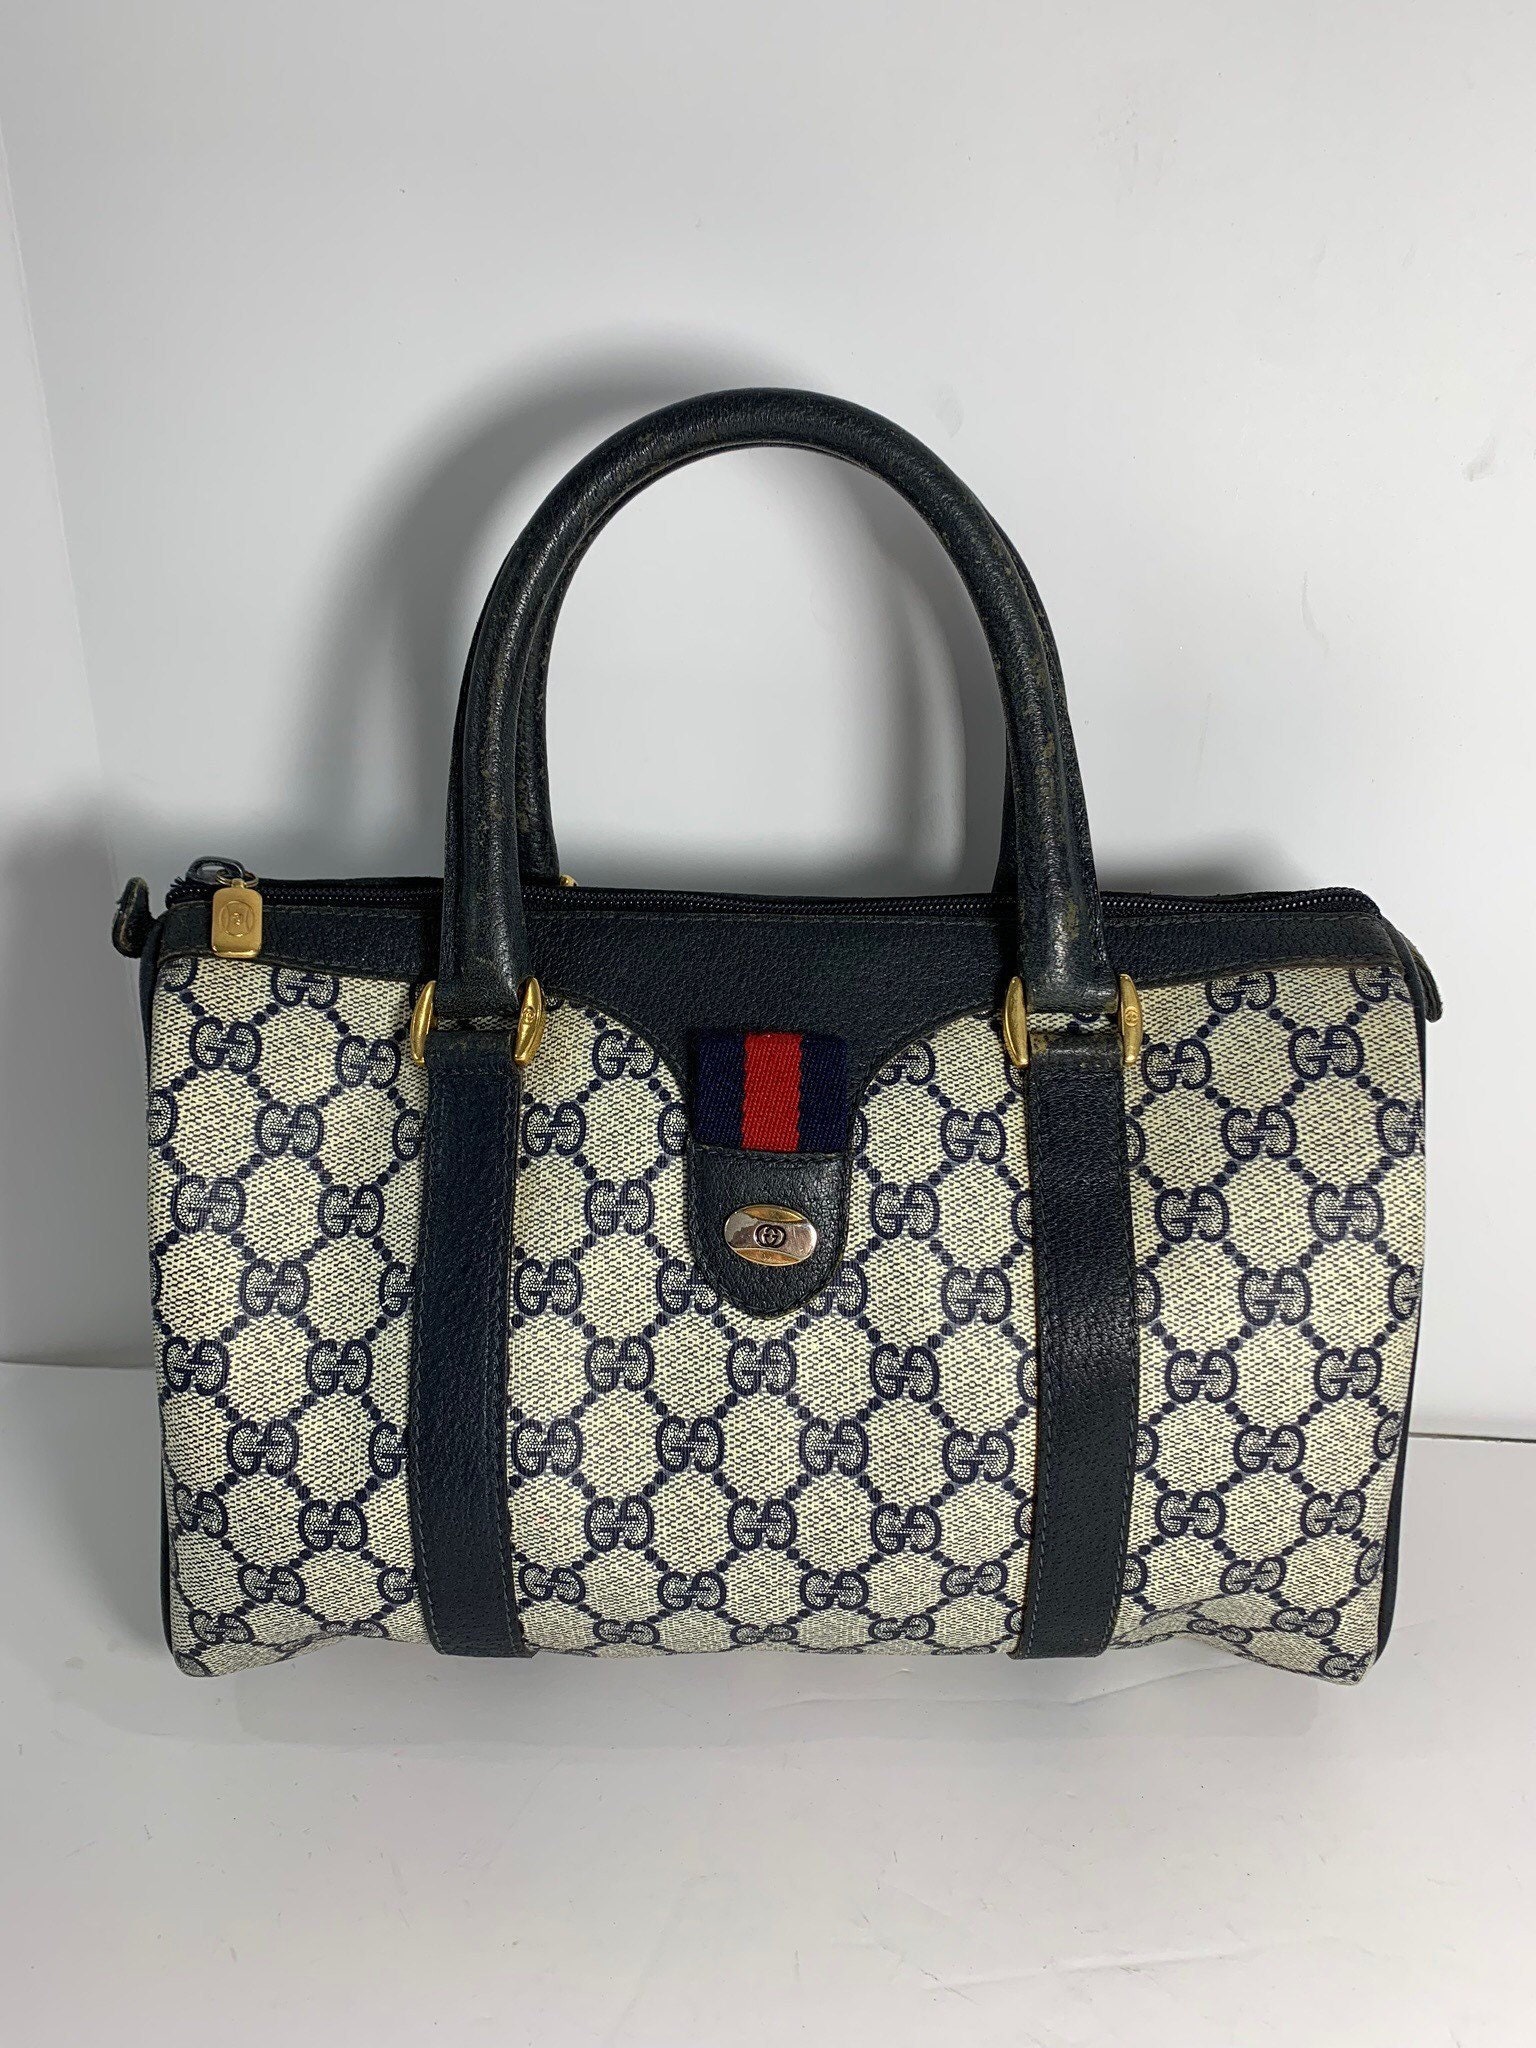 GUCCI Authentic Navy Blue Leather and Canvas Satchel Handbag - Etsy